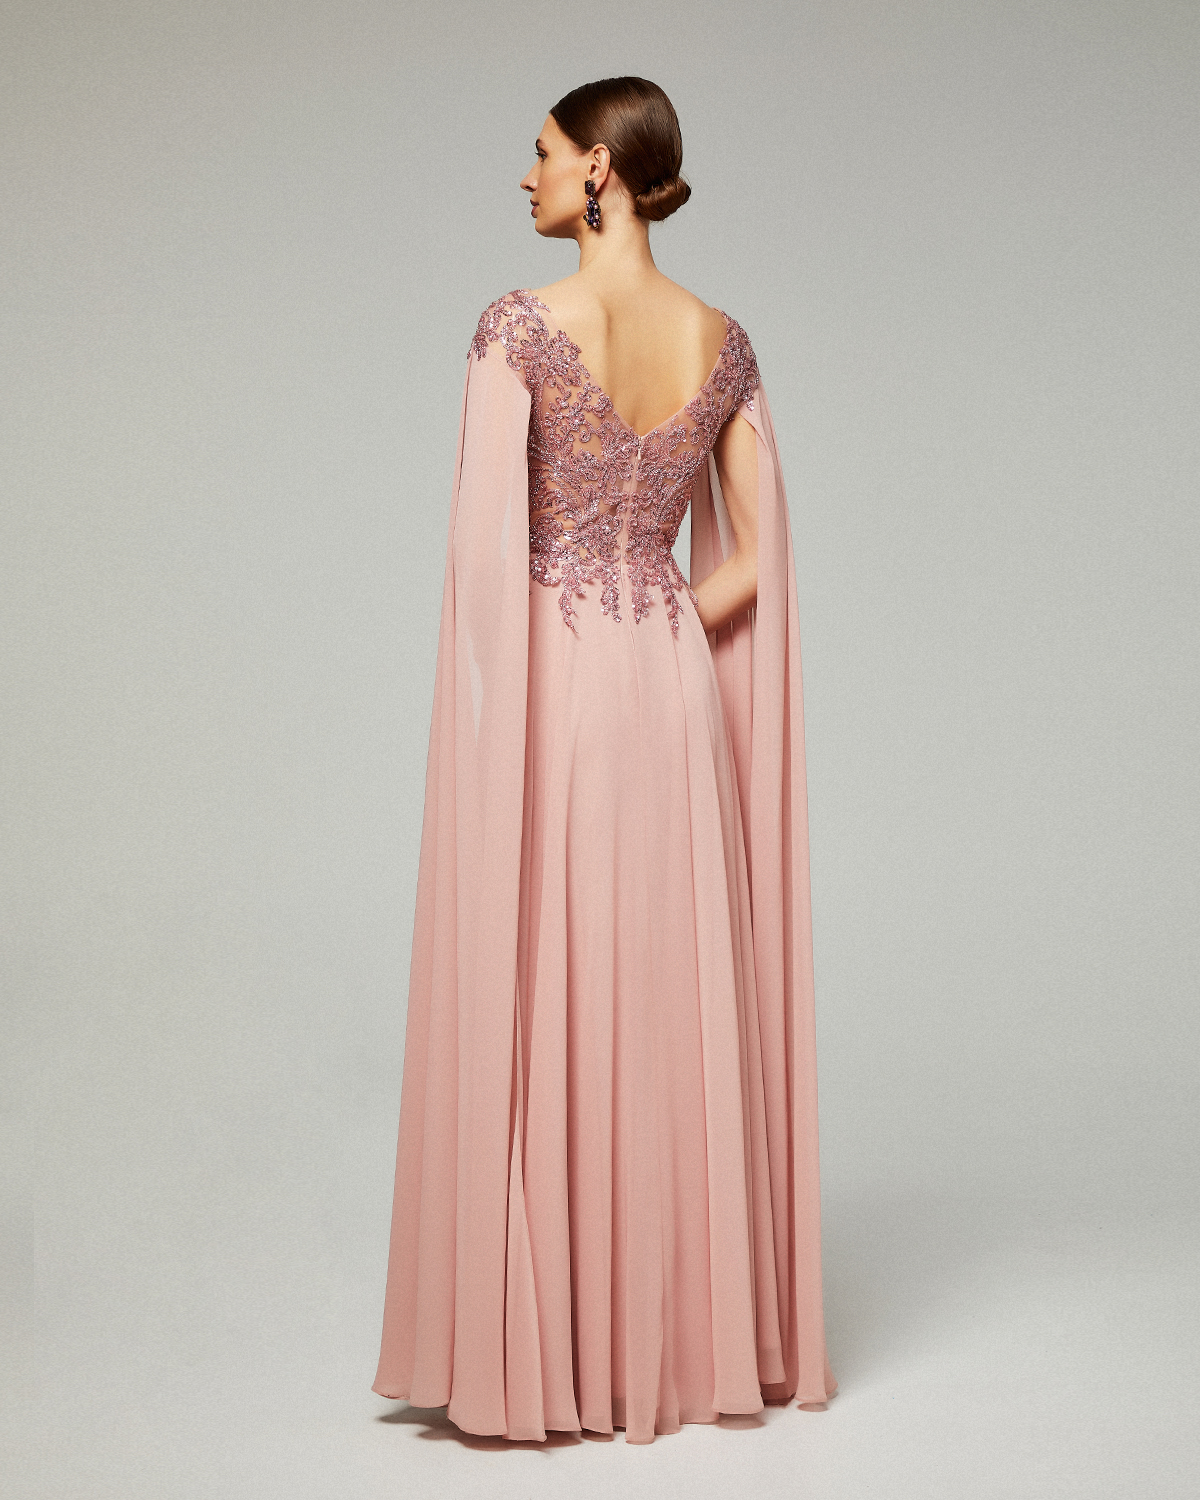 Classic Dresses / Long  chiffon dress with fully beaded lace top and long sleeves